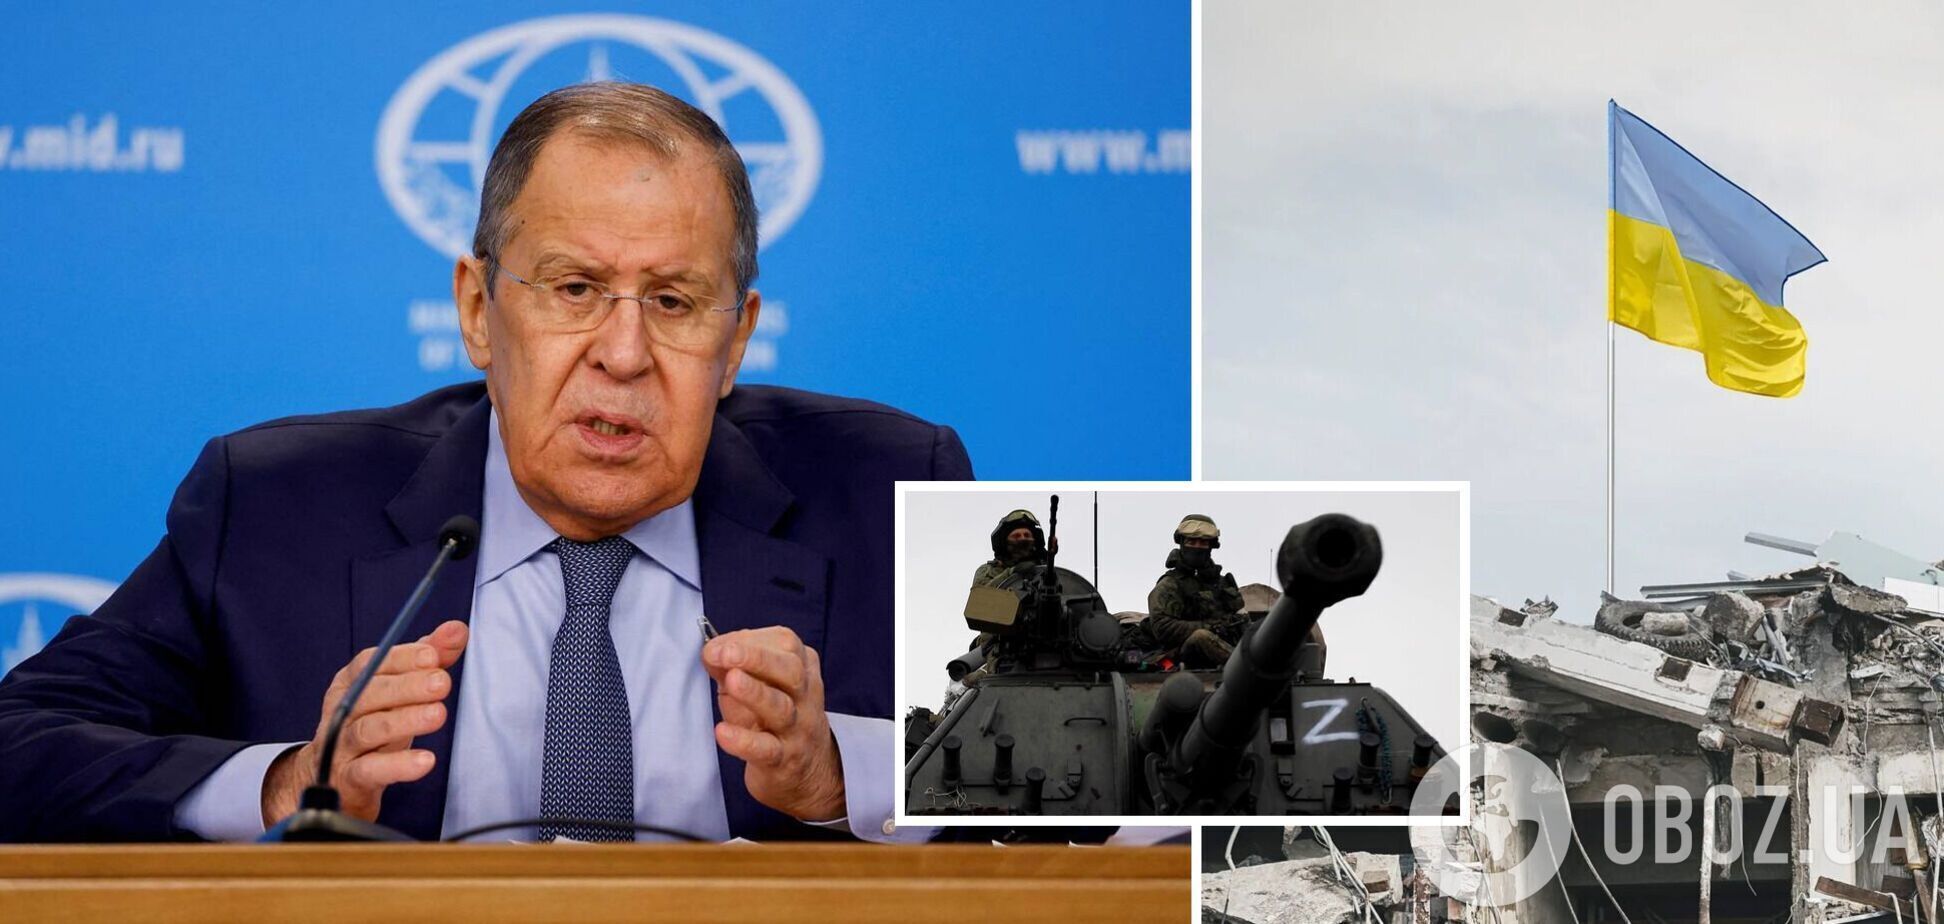 The Kremlin has a special plan: ISW explained what lies behind Lavrov's statements about the war against Ukraine and the possibility of negotiations